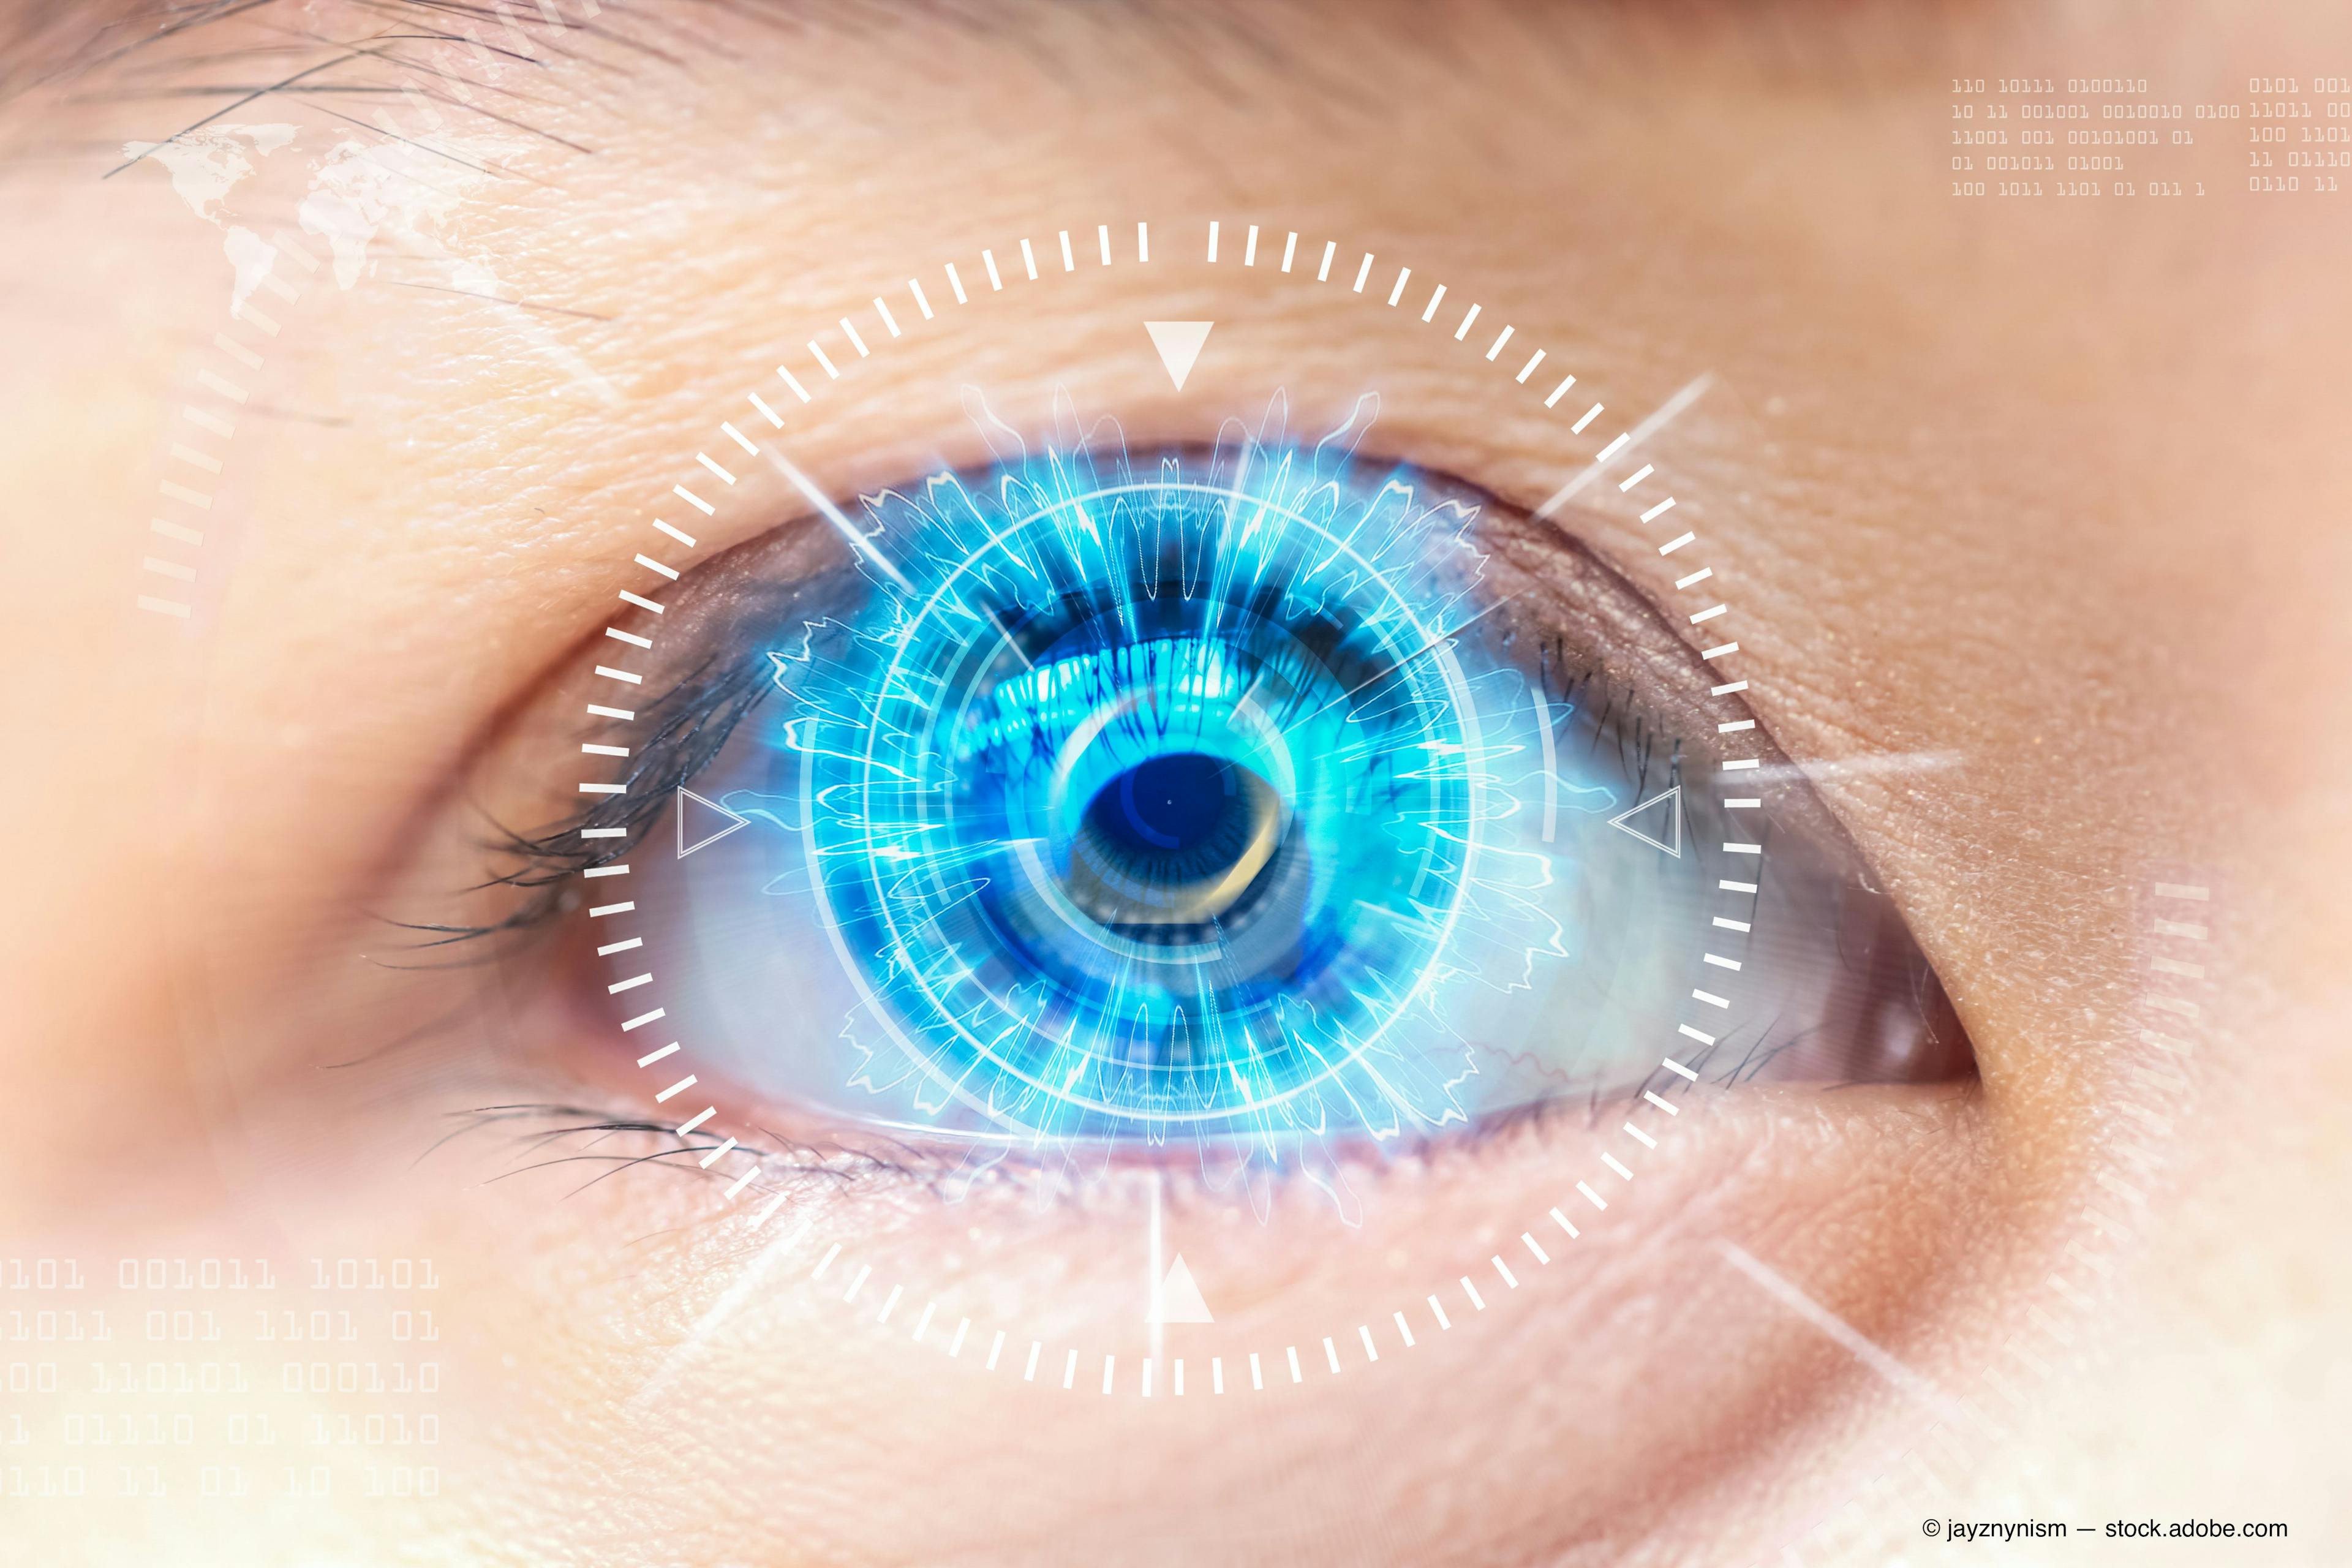 Using technology to manage corneal challenges before cataract surgery